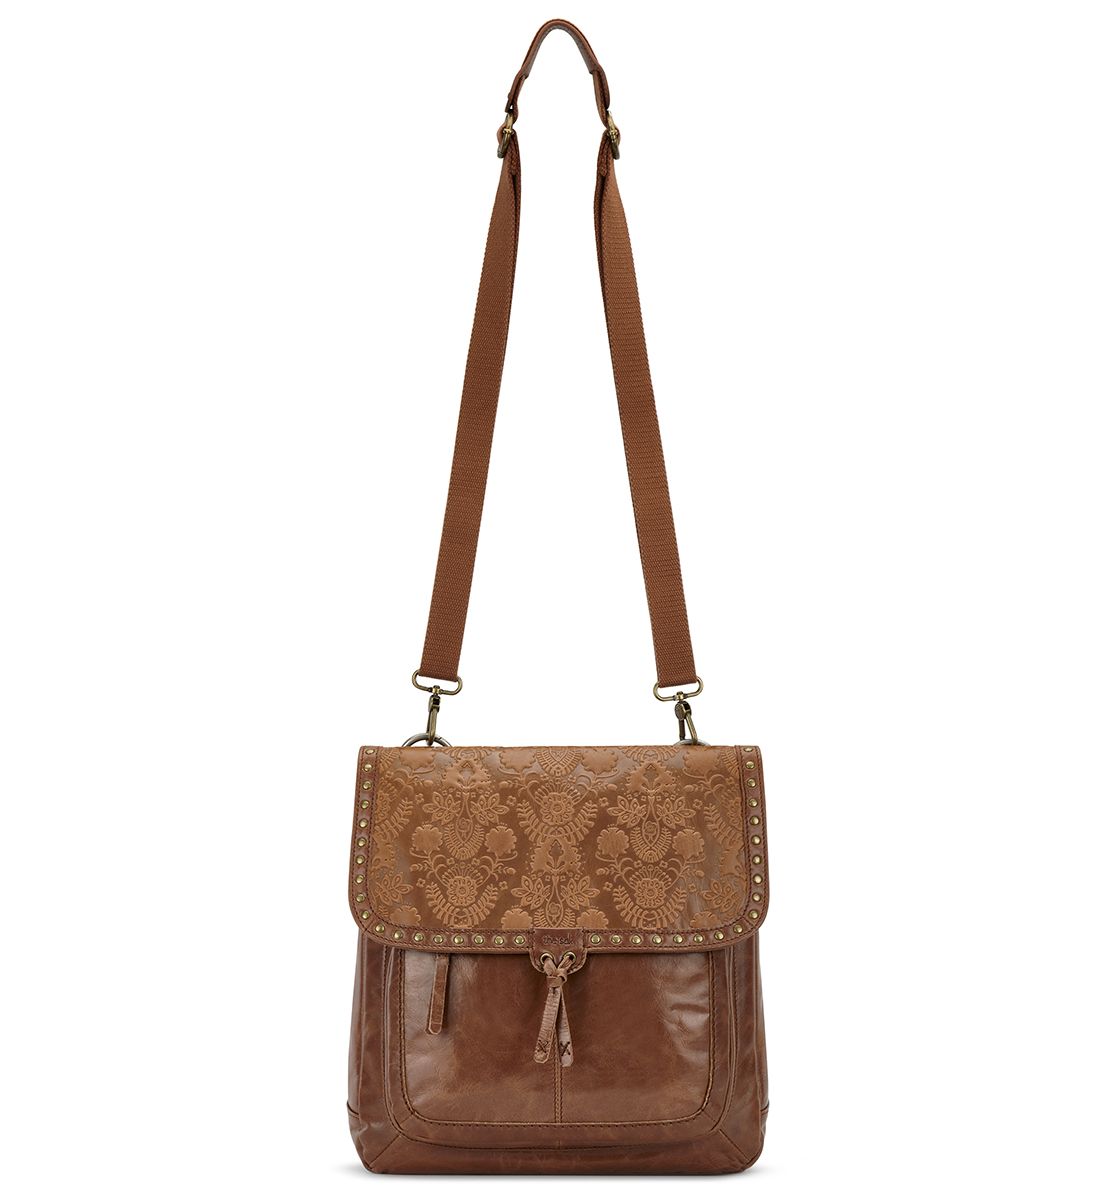 The Sak Ventura Convertible Backpack II Leather - Tobacco Floral Embossed